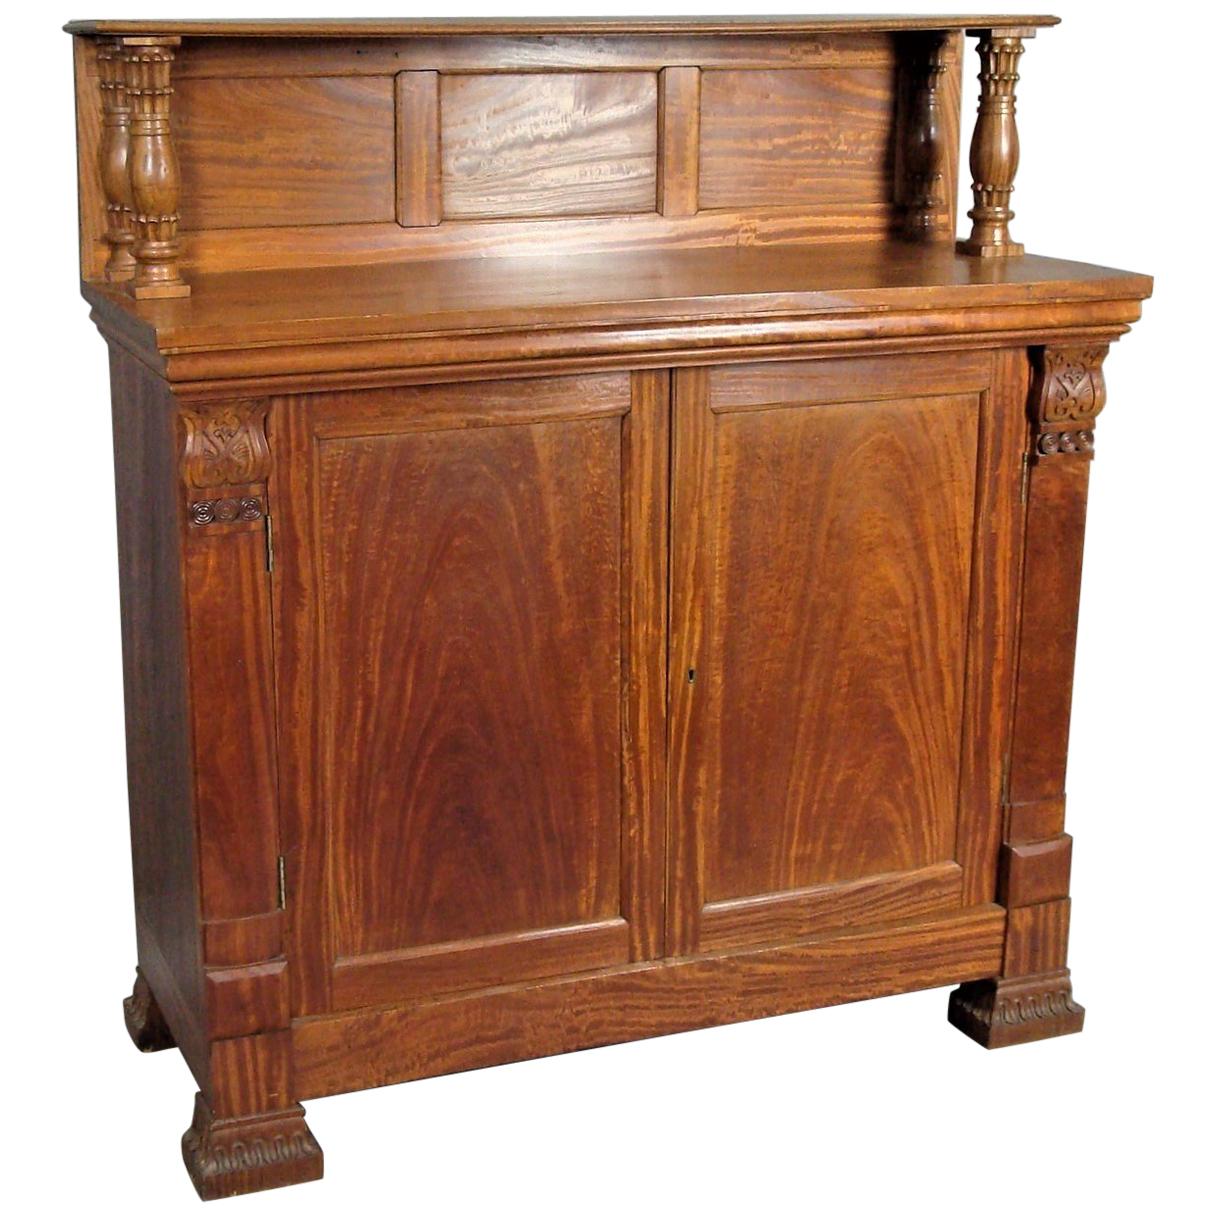 Good Mid-19th Century Anglo-Indian Solid Satinwood Chiffonier For Sale